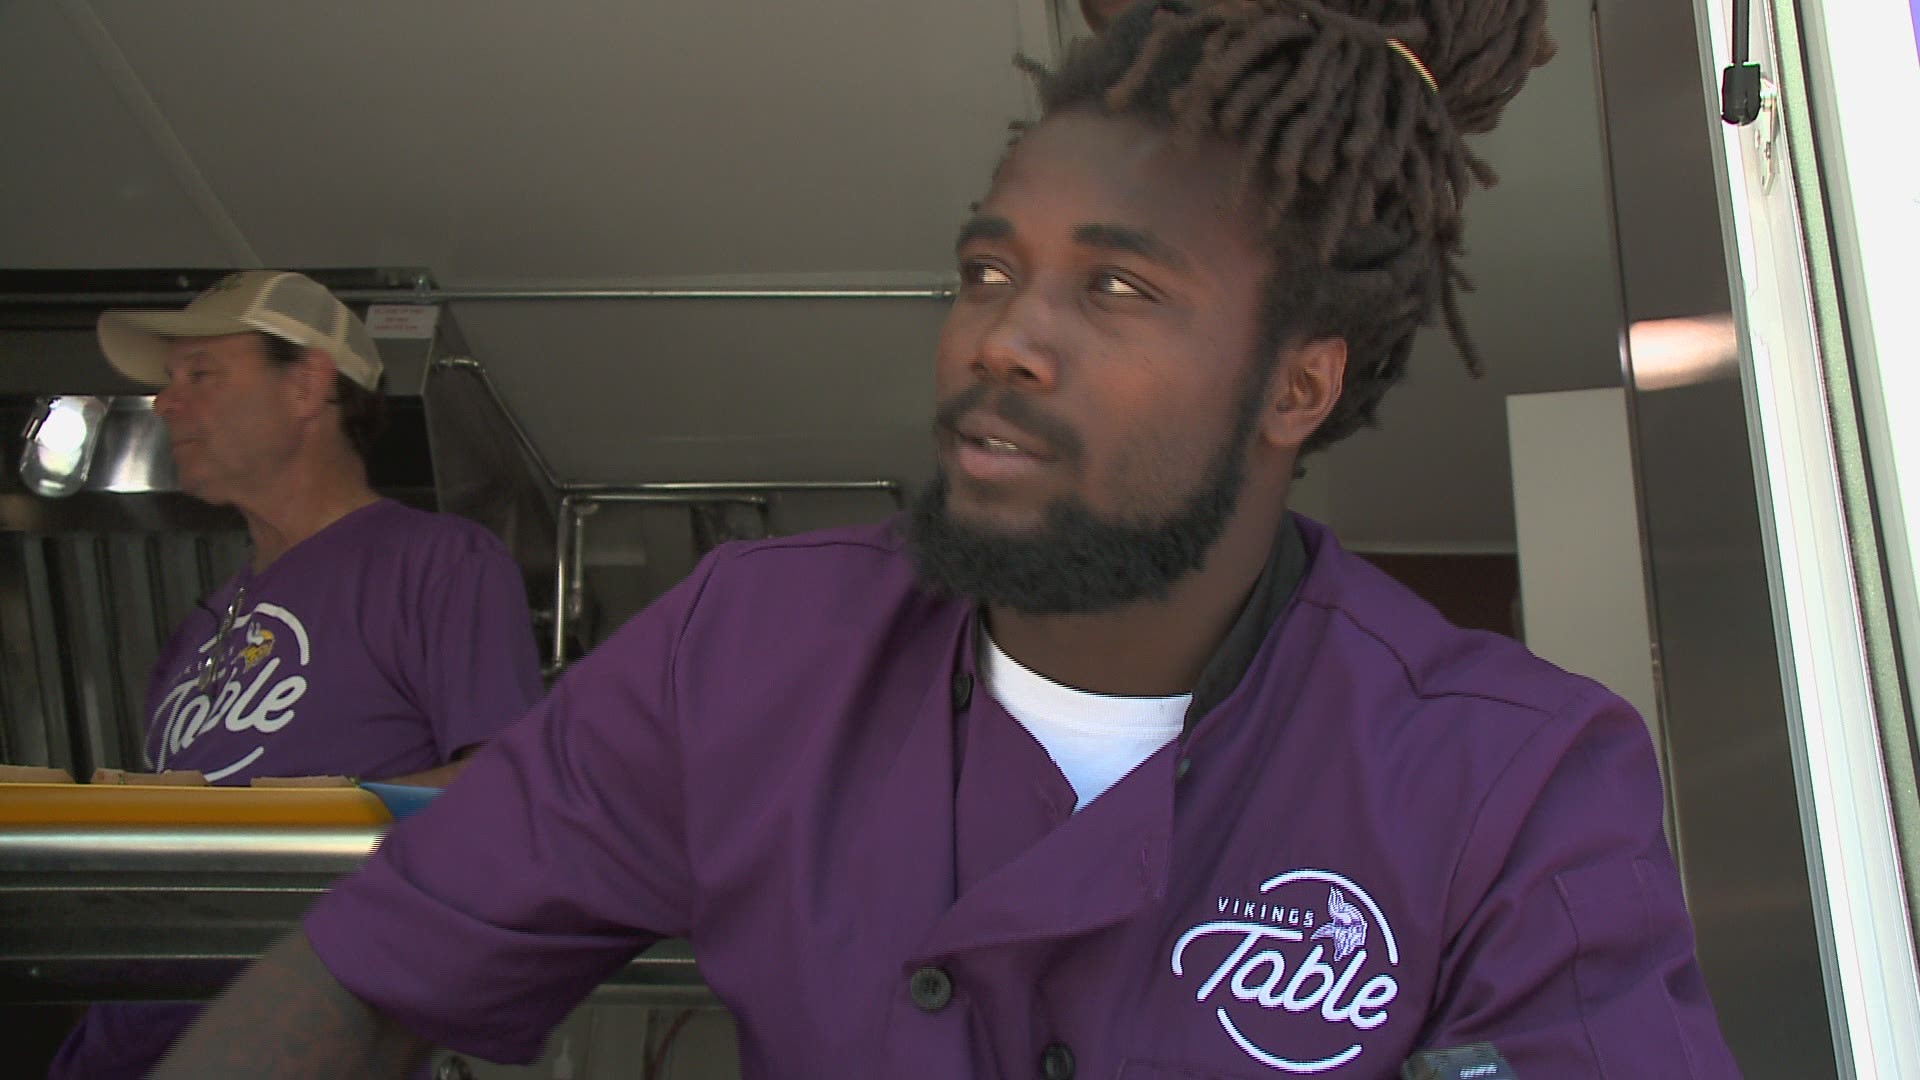 The Minnesota Vikings will travel through the Twin Cities to give hot meals to the youth in the Twins Cities.